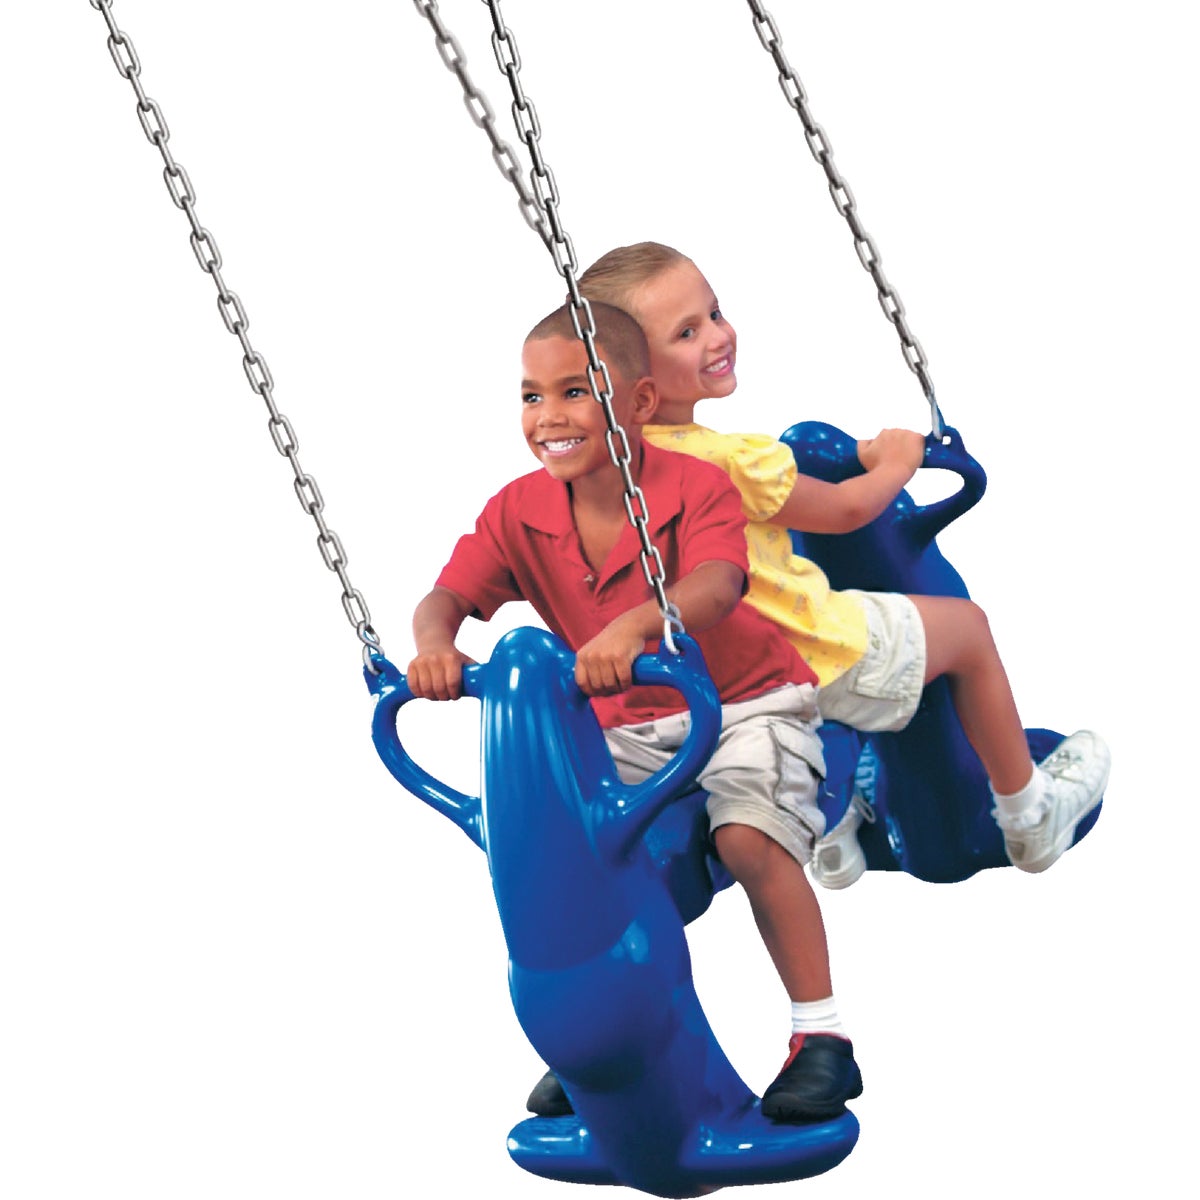 Item 819603, Your child can get this swing moving by themselves or invite a friend to 